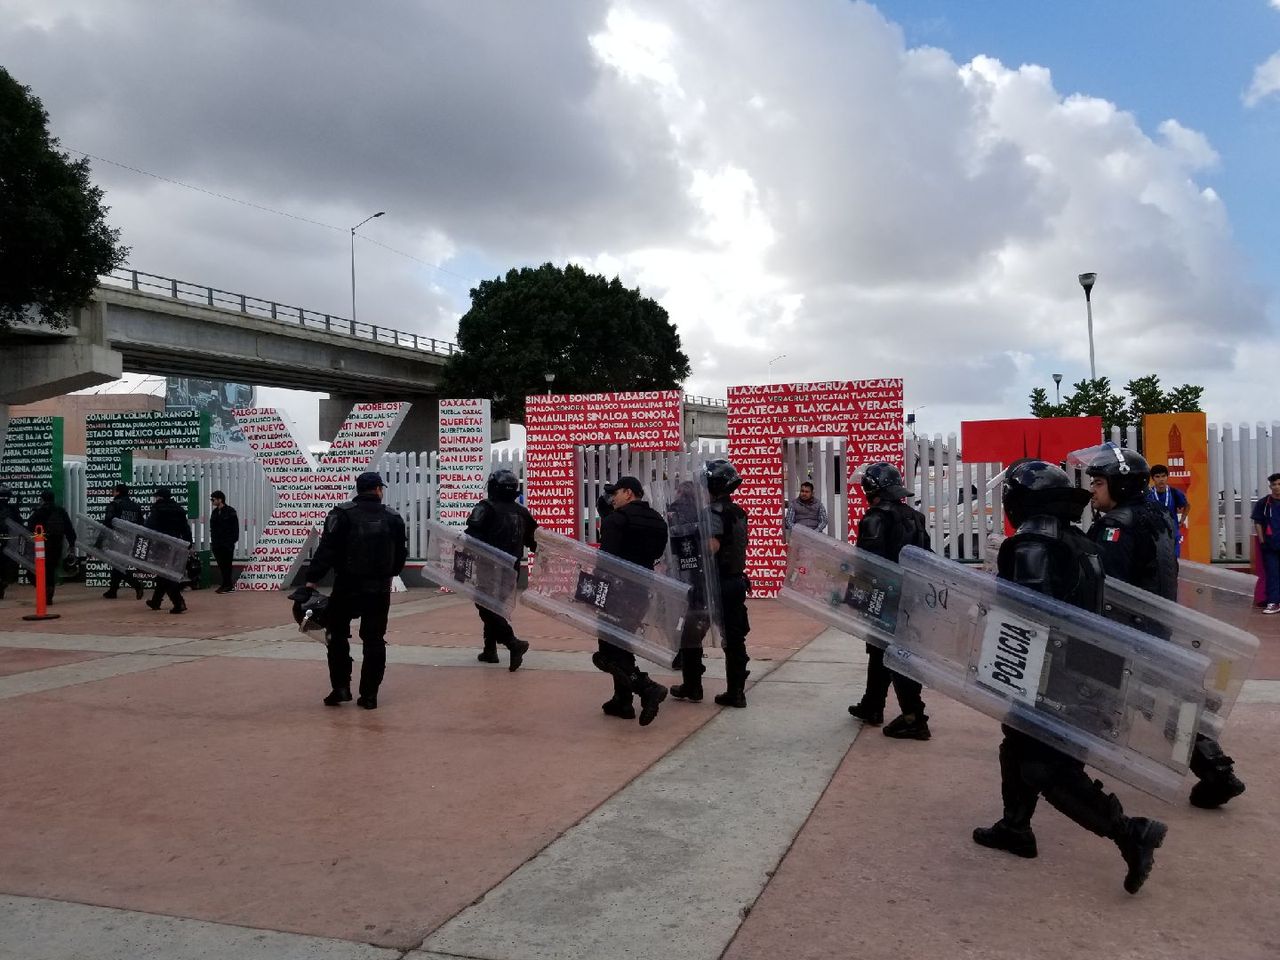 Mexican police